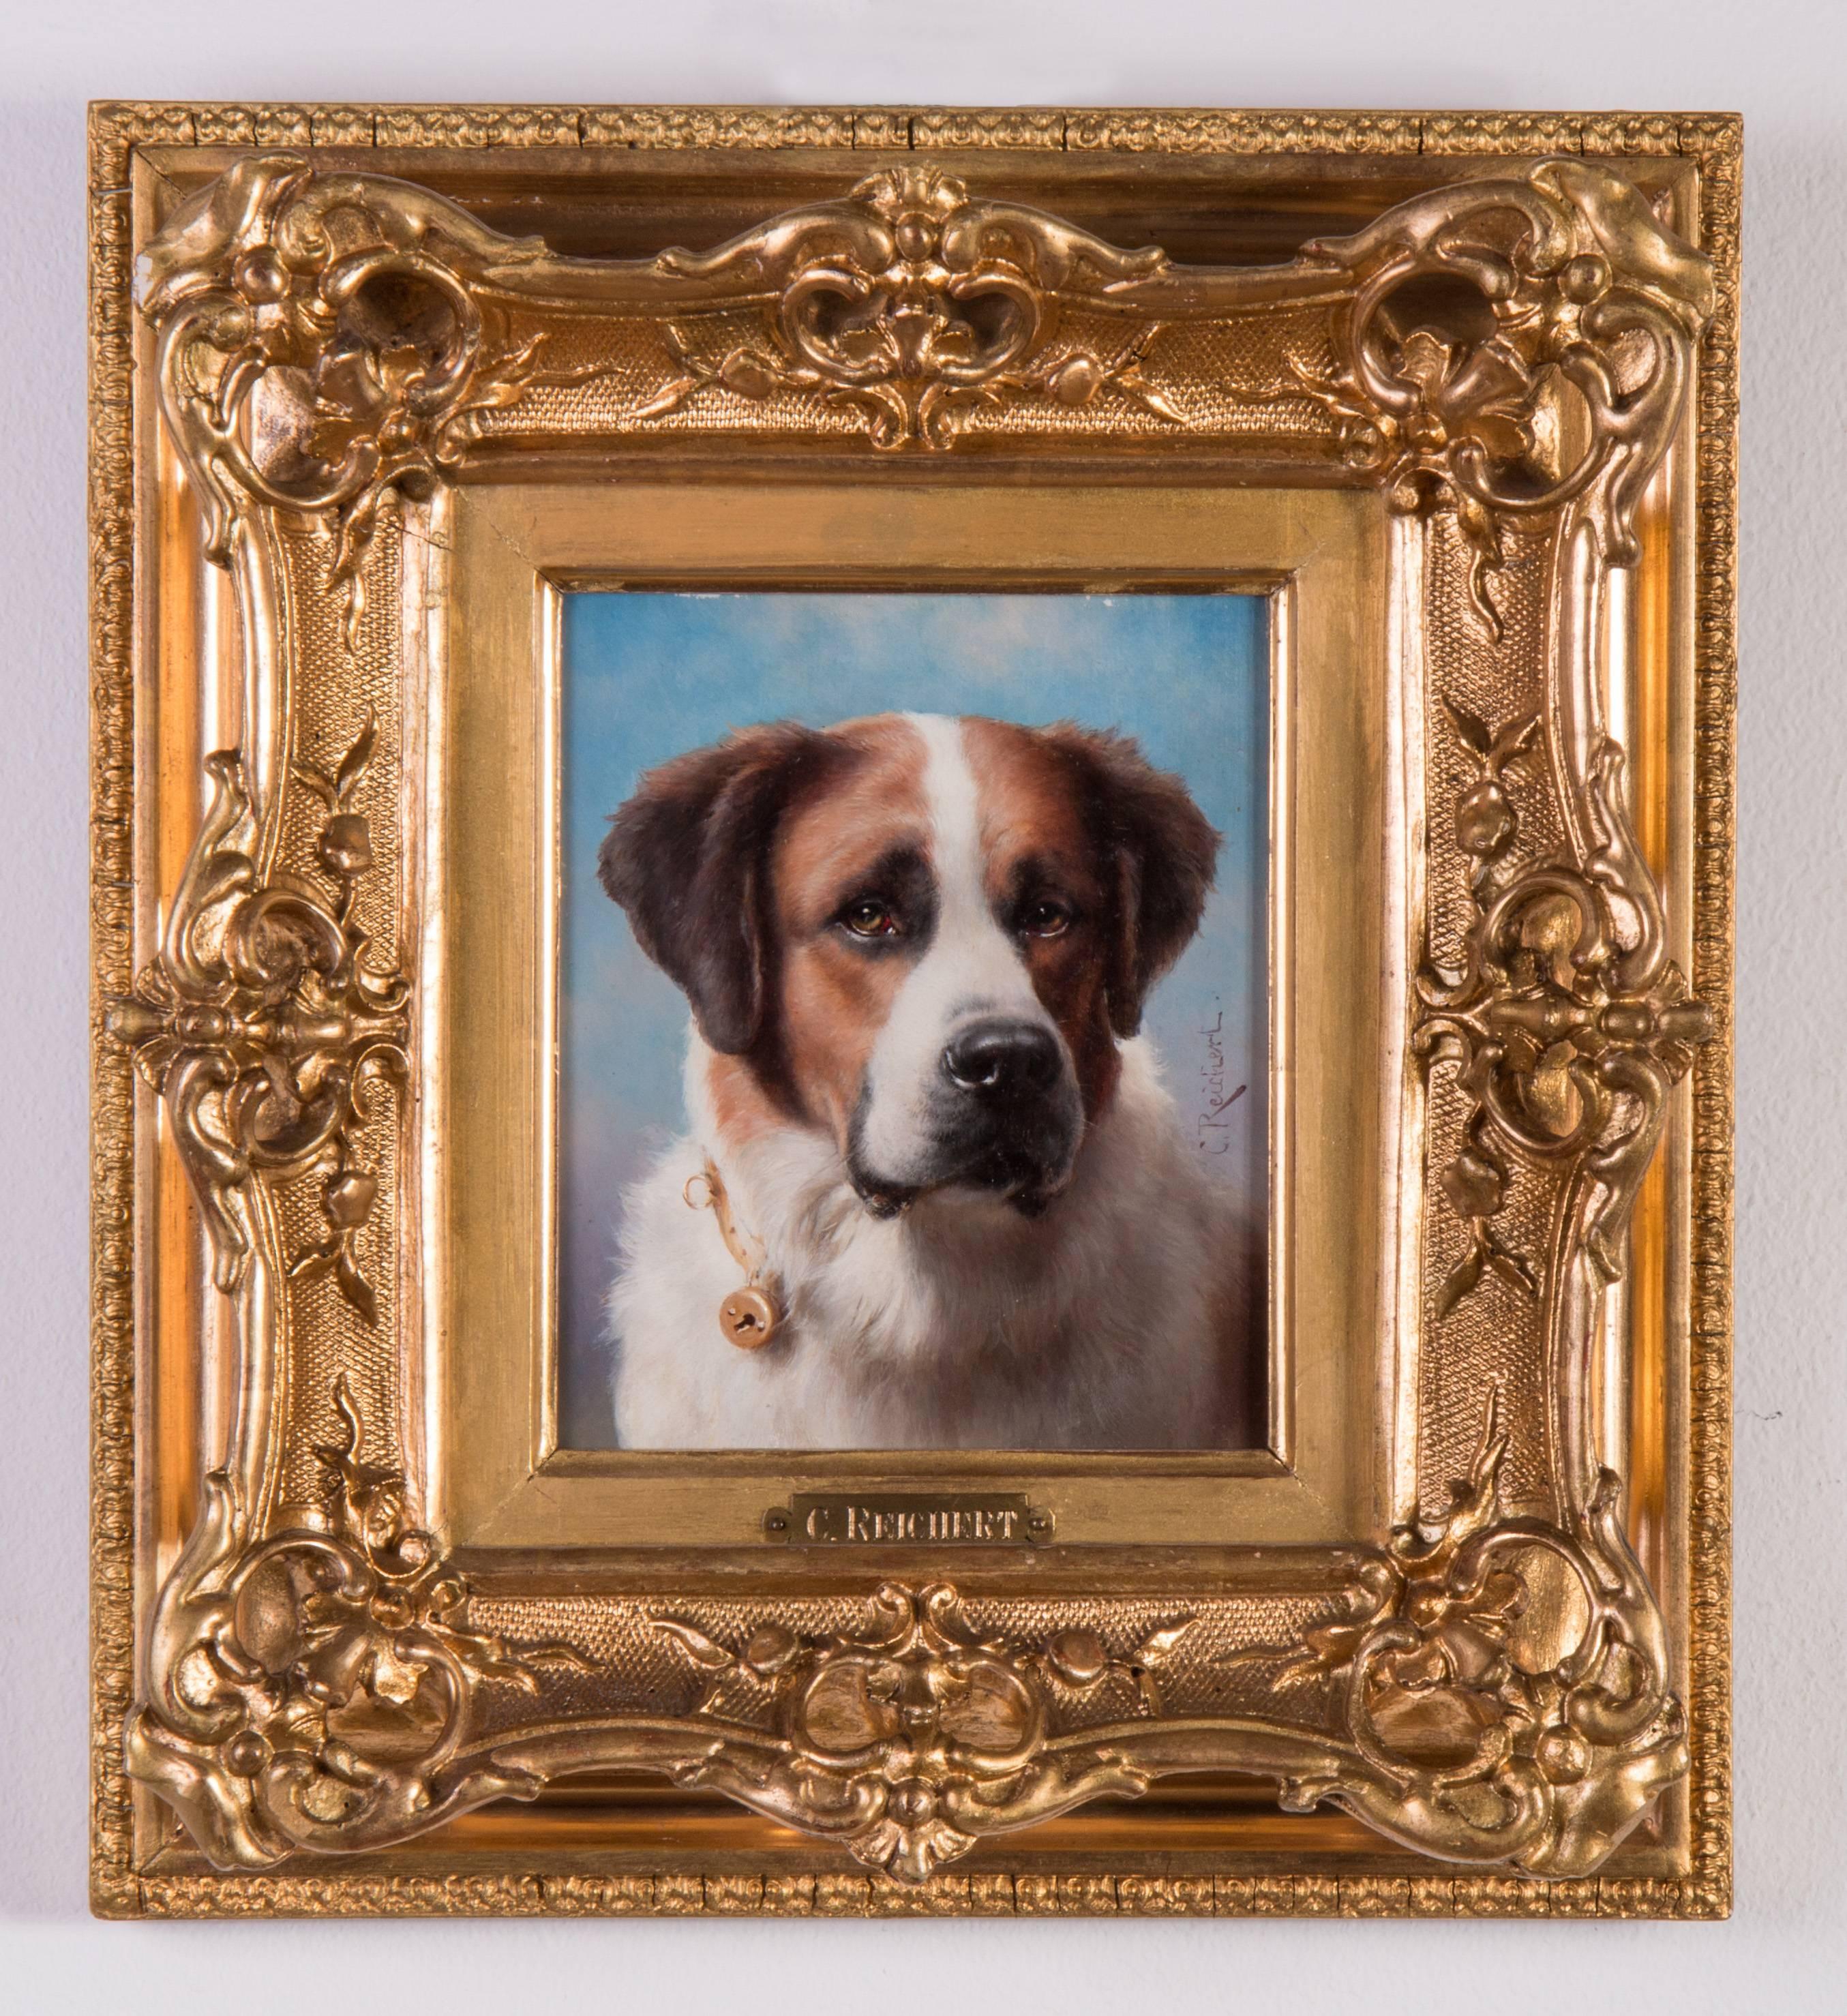 Signed: „C. Reichert”
Oil on panel, measure: 15 x 12.5 cm, framed

Carl Reichert (Vienna 1836-1918 Graz). He was a well-known animal painter in Austria and painted for example some dogs of Empress Elisabeth of Austria.
 